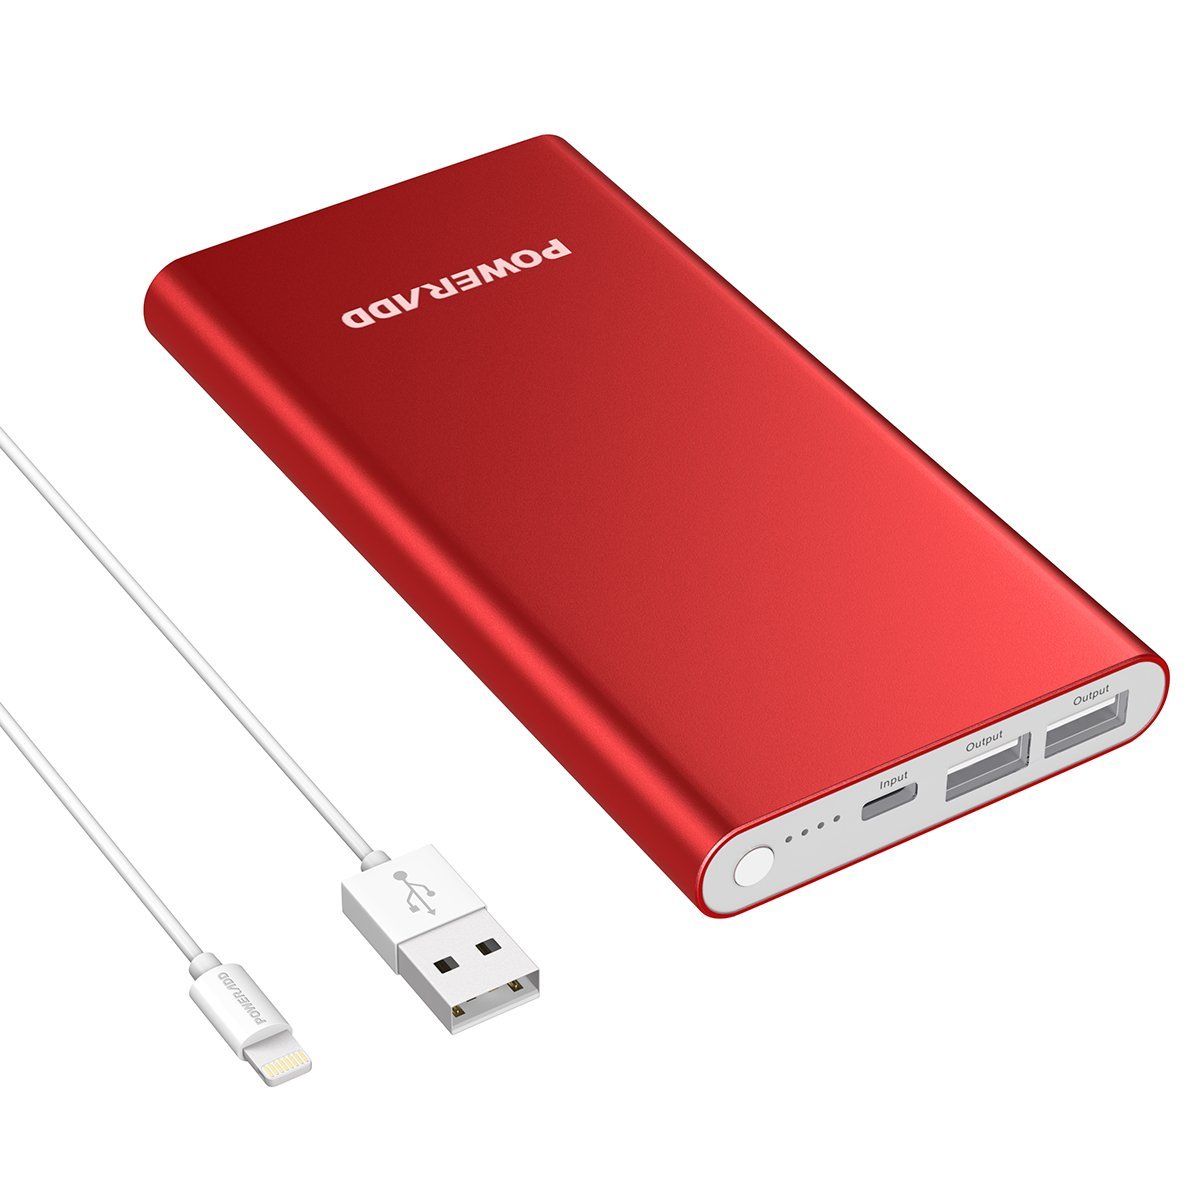 Today only: Powerad pilot 12000mAh portable power banks for $19